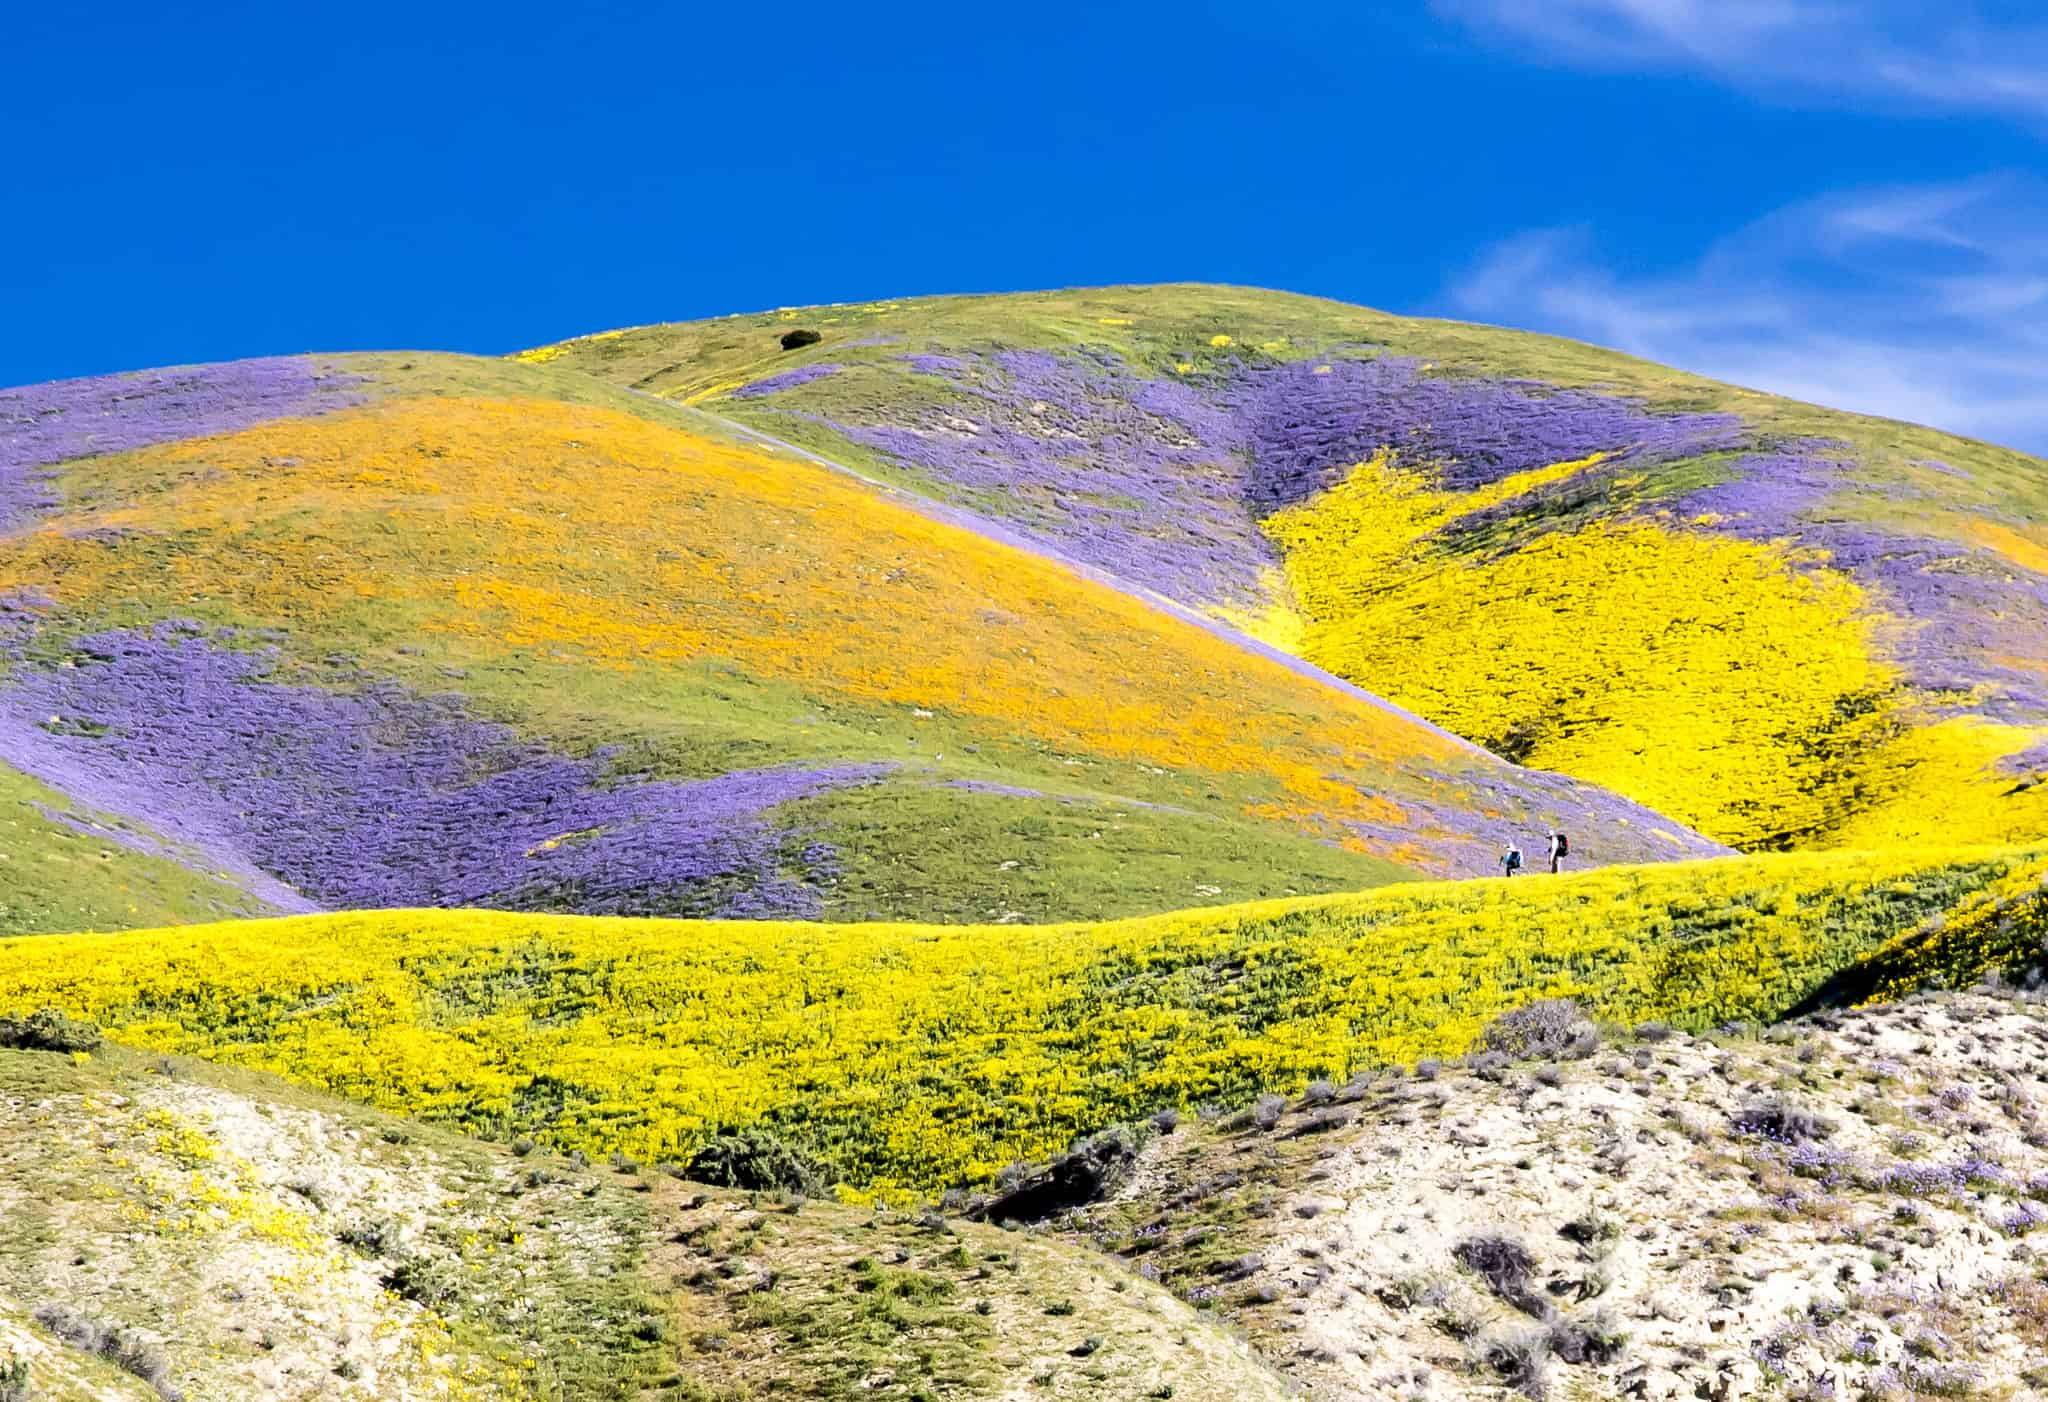 The 2023 California Superbloom A spectacular display of nature's beauty